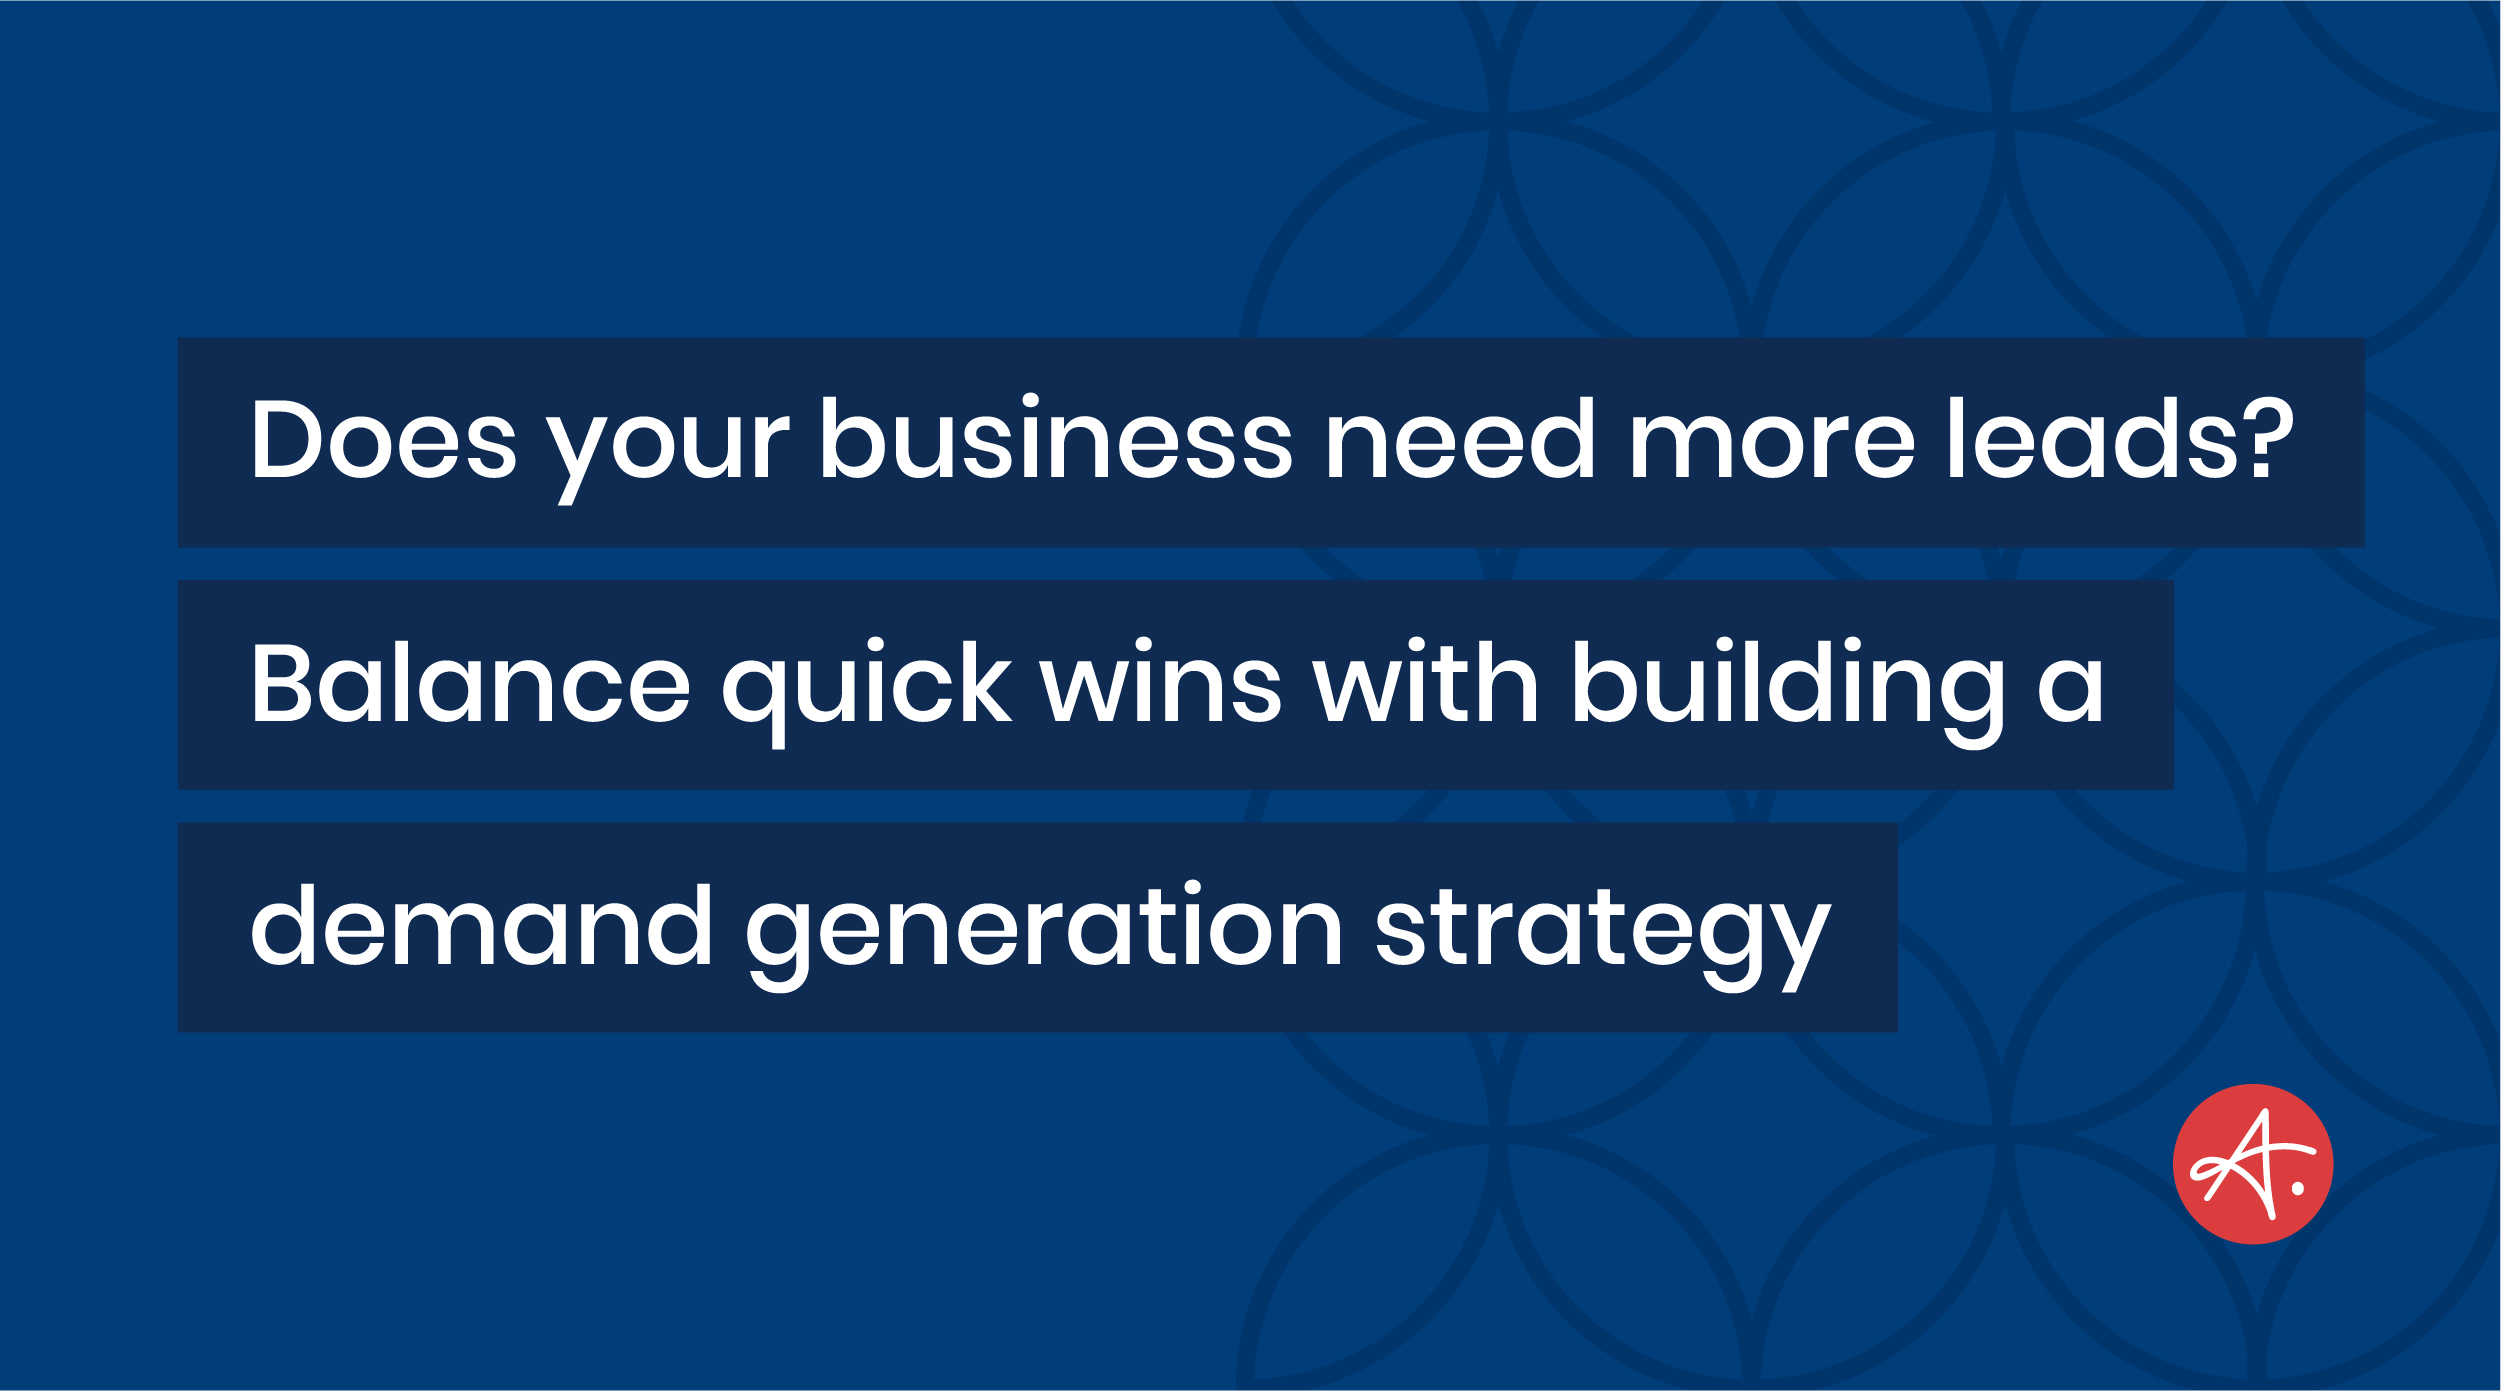 Does your business need more leads? Balance quick wins with building a demand generation strategy